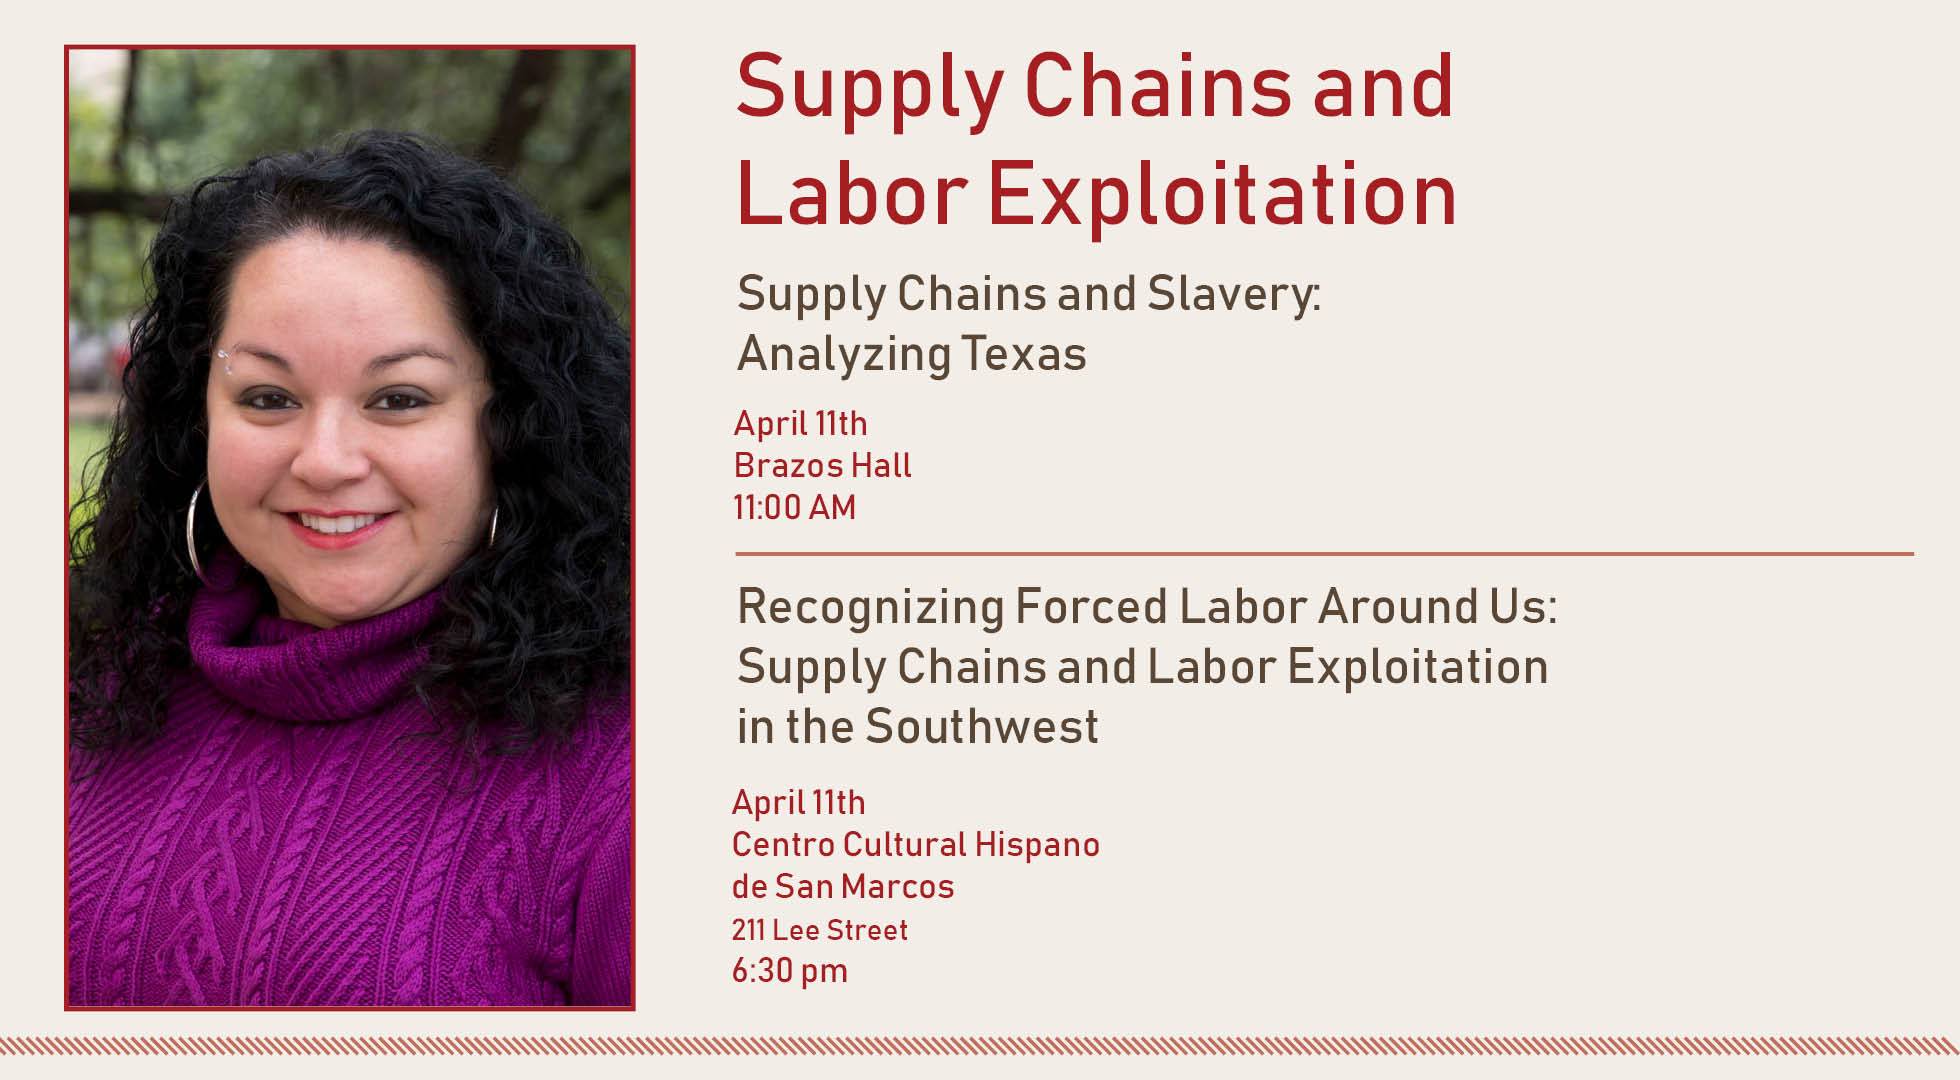 Supply Chains and Labor Exploitation, event image